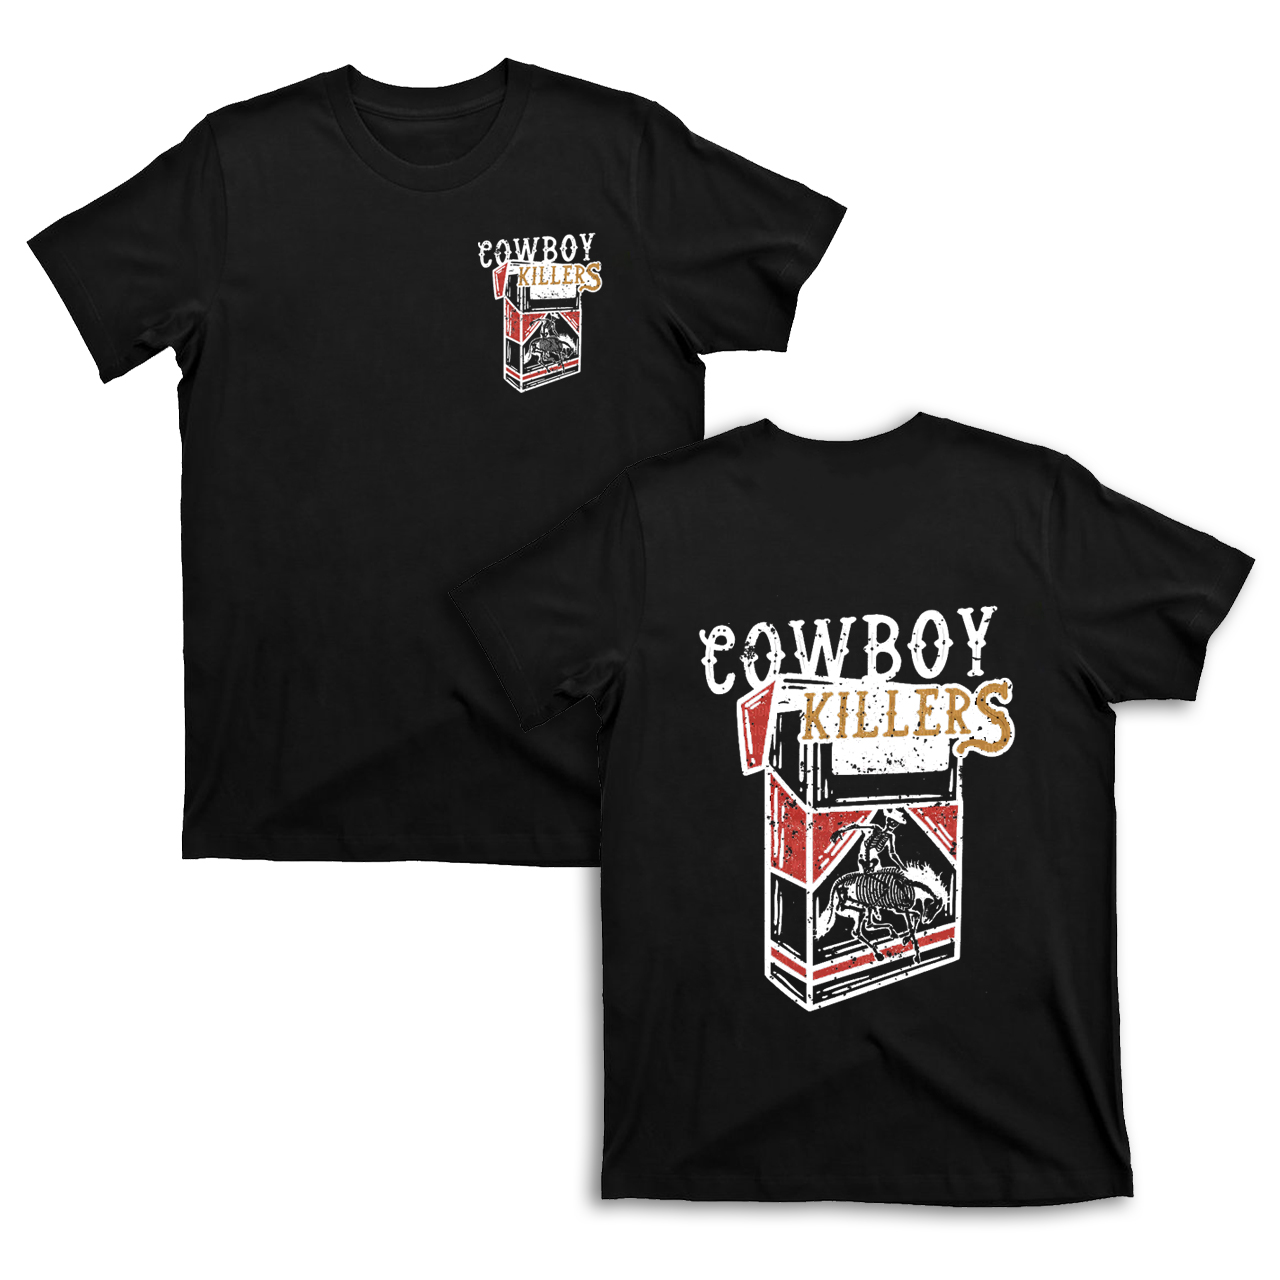 Cowboy killers Double sided printing T-shirts